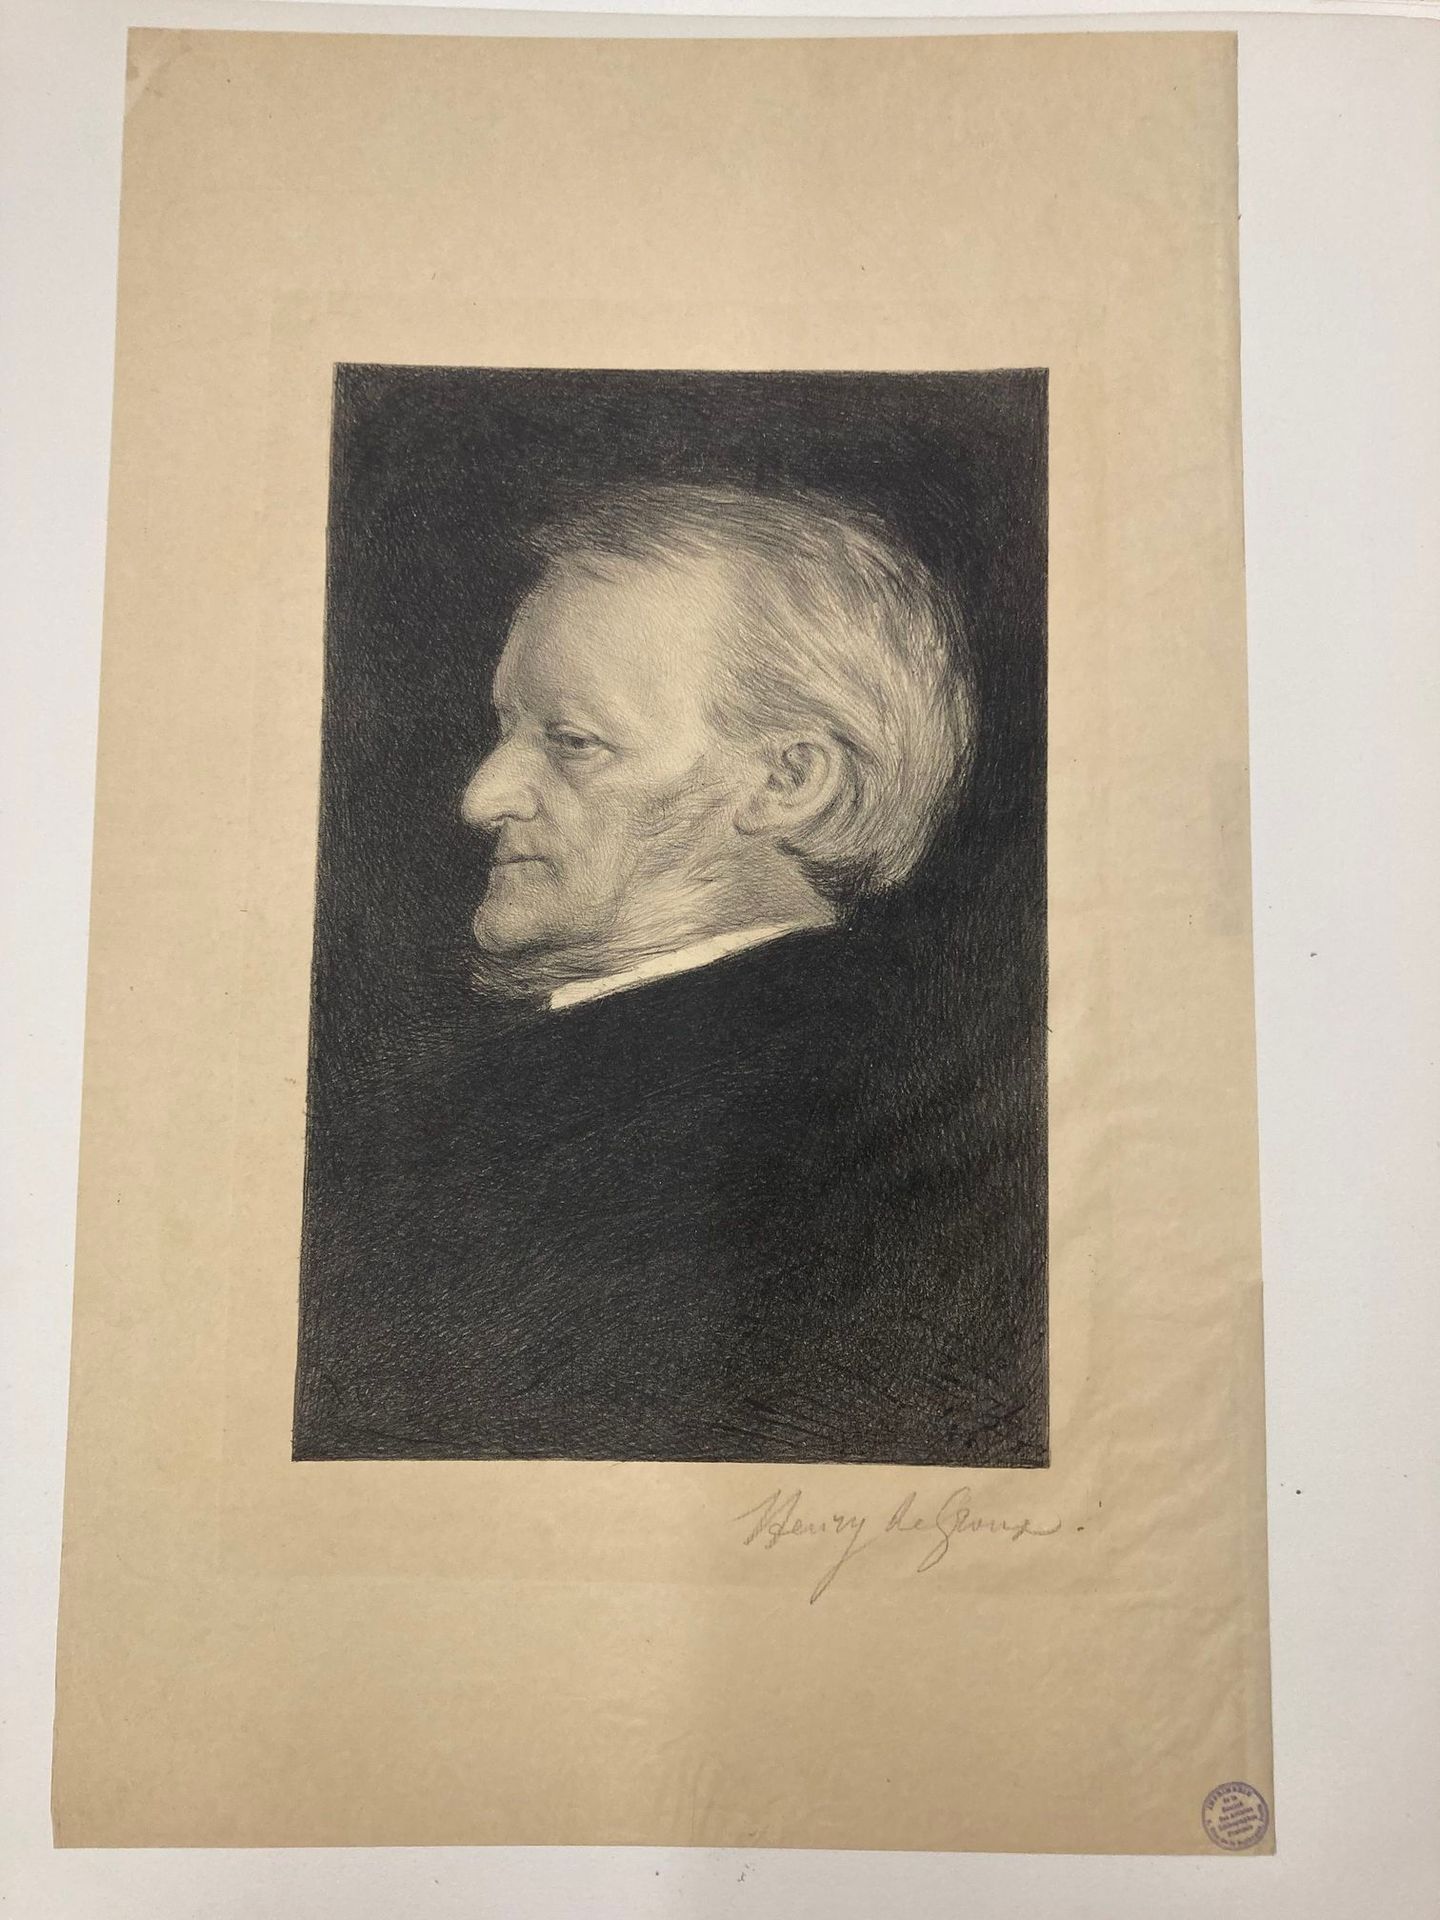 Henry de GROUX (1866-1930) Richard Wagner
Two different prints. Lithographs sign&hellip;